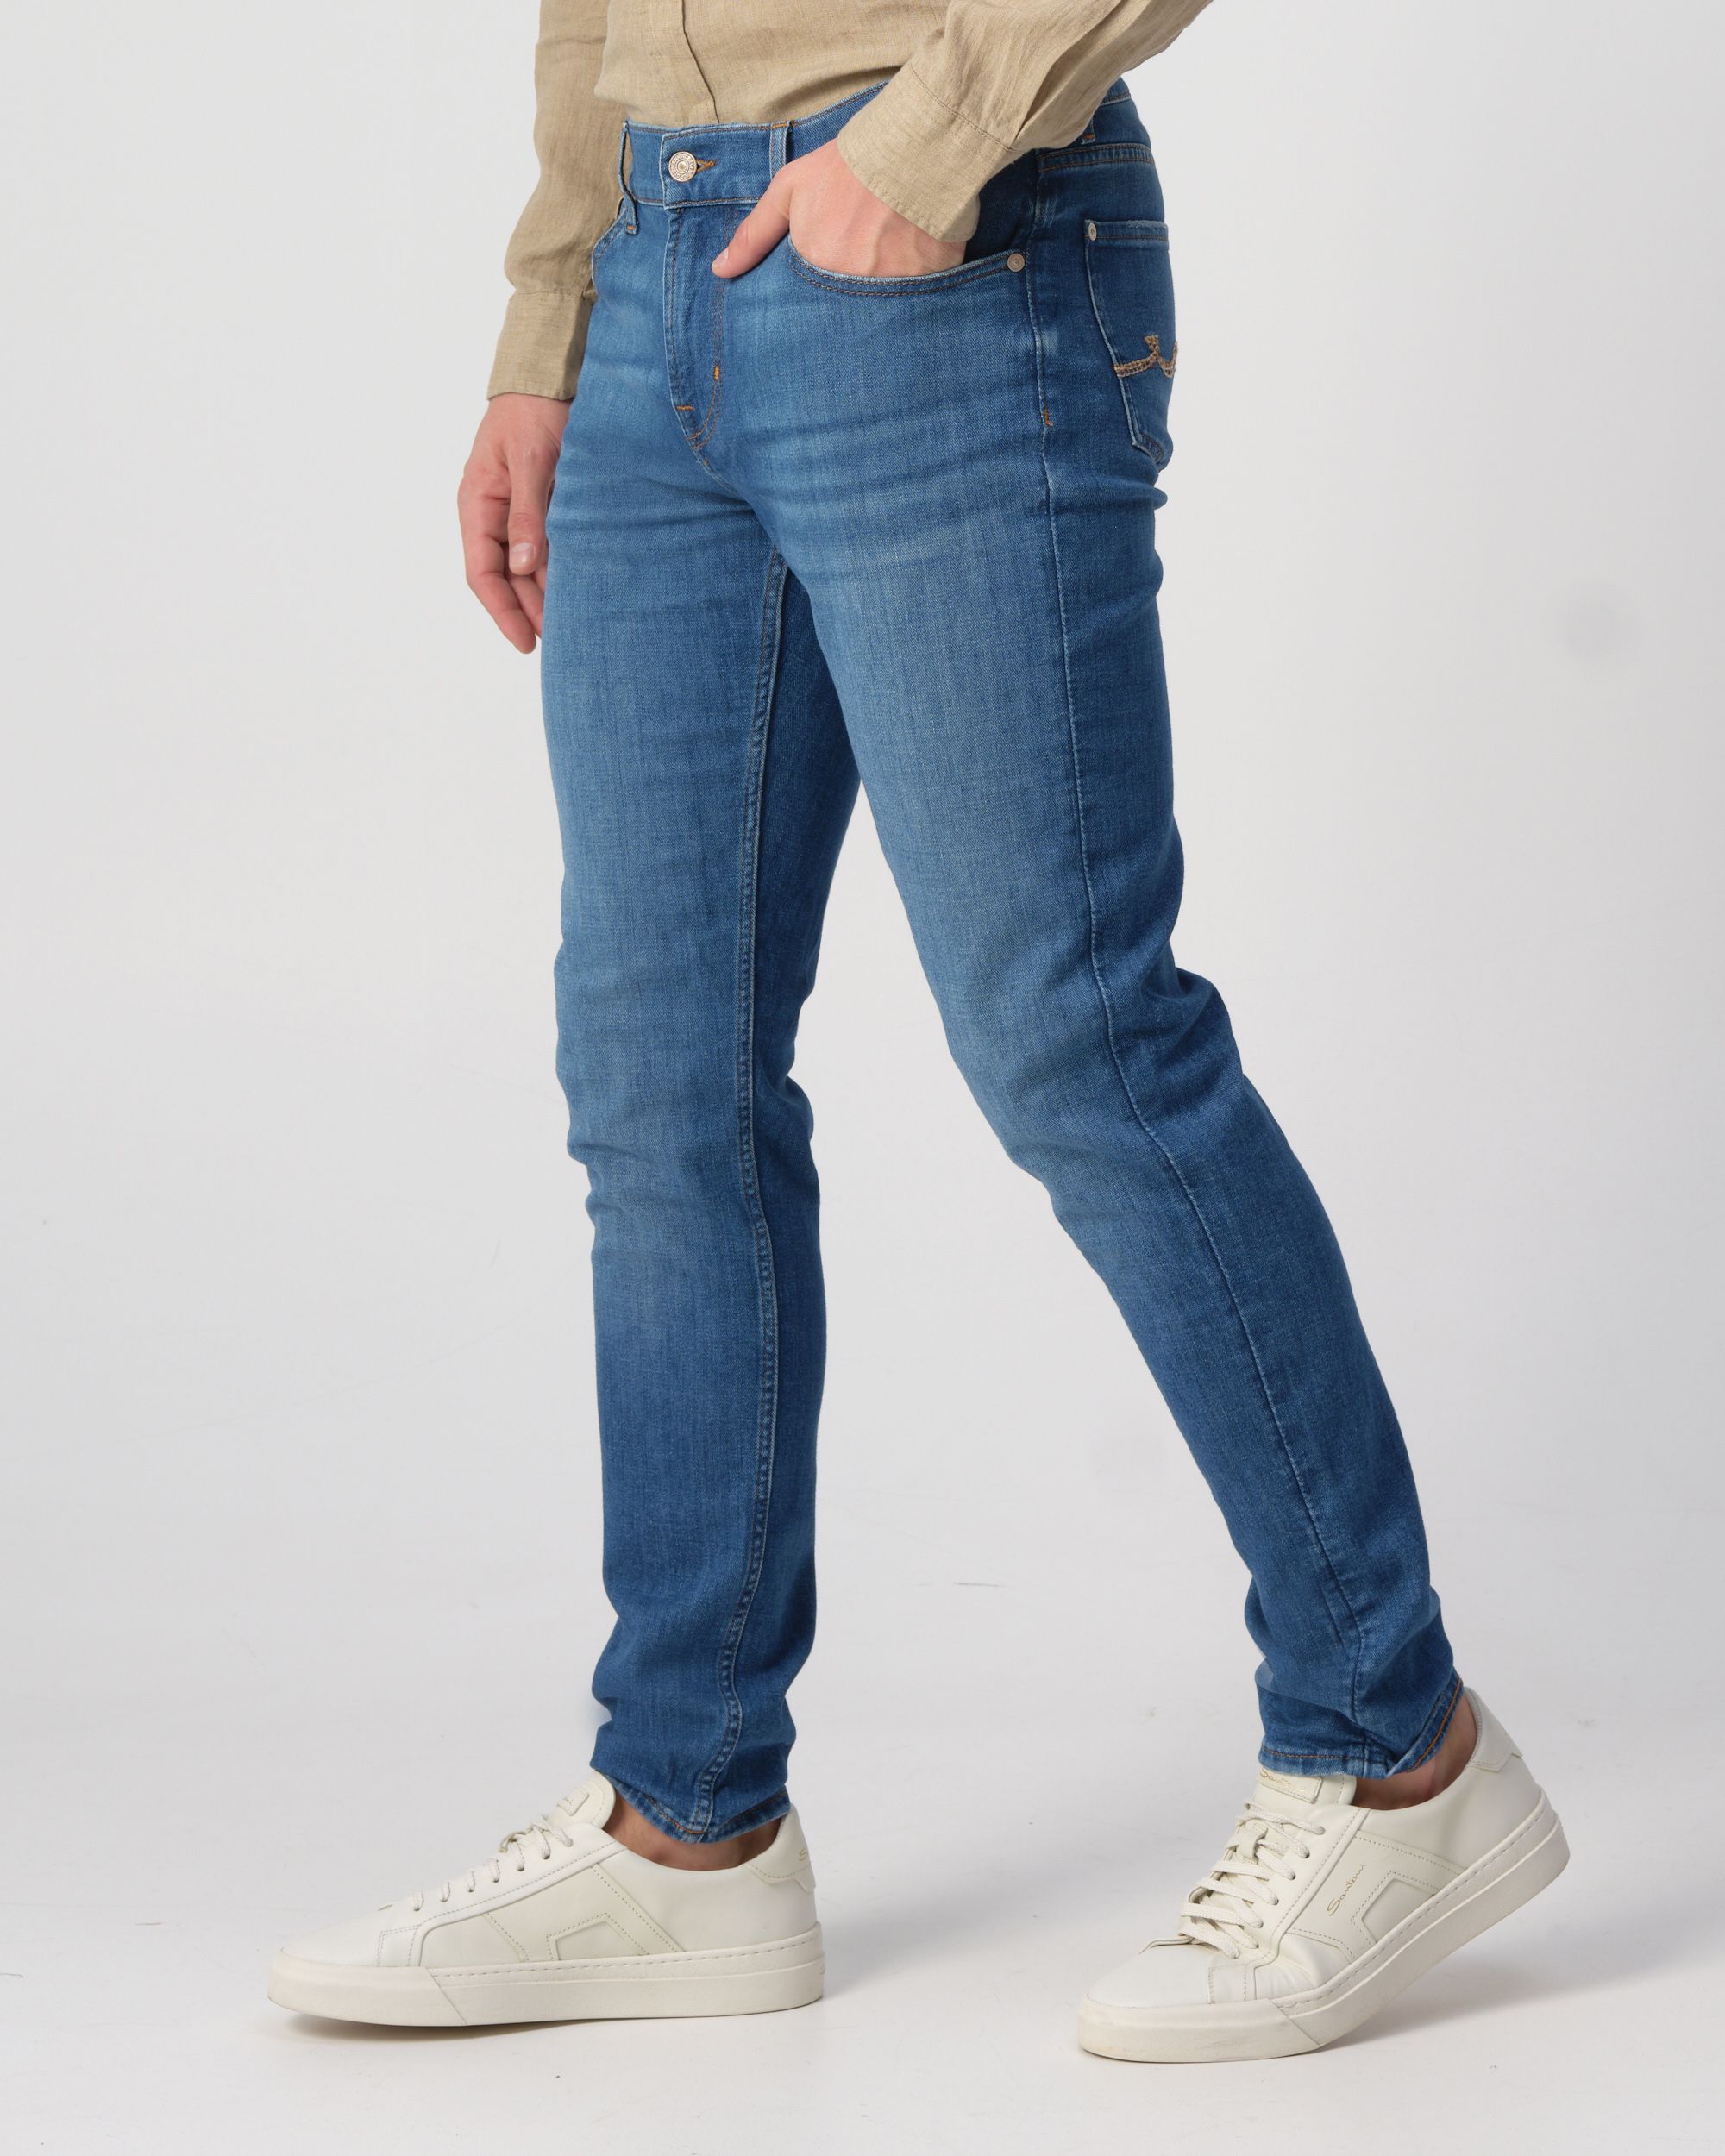 Seven for all mankind Slimmy Tapered Jeans Blauw 094721-001-30